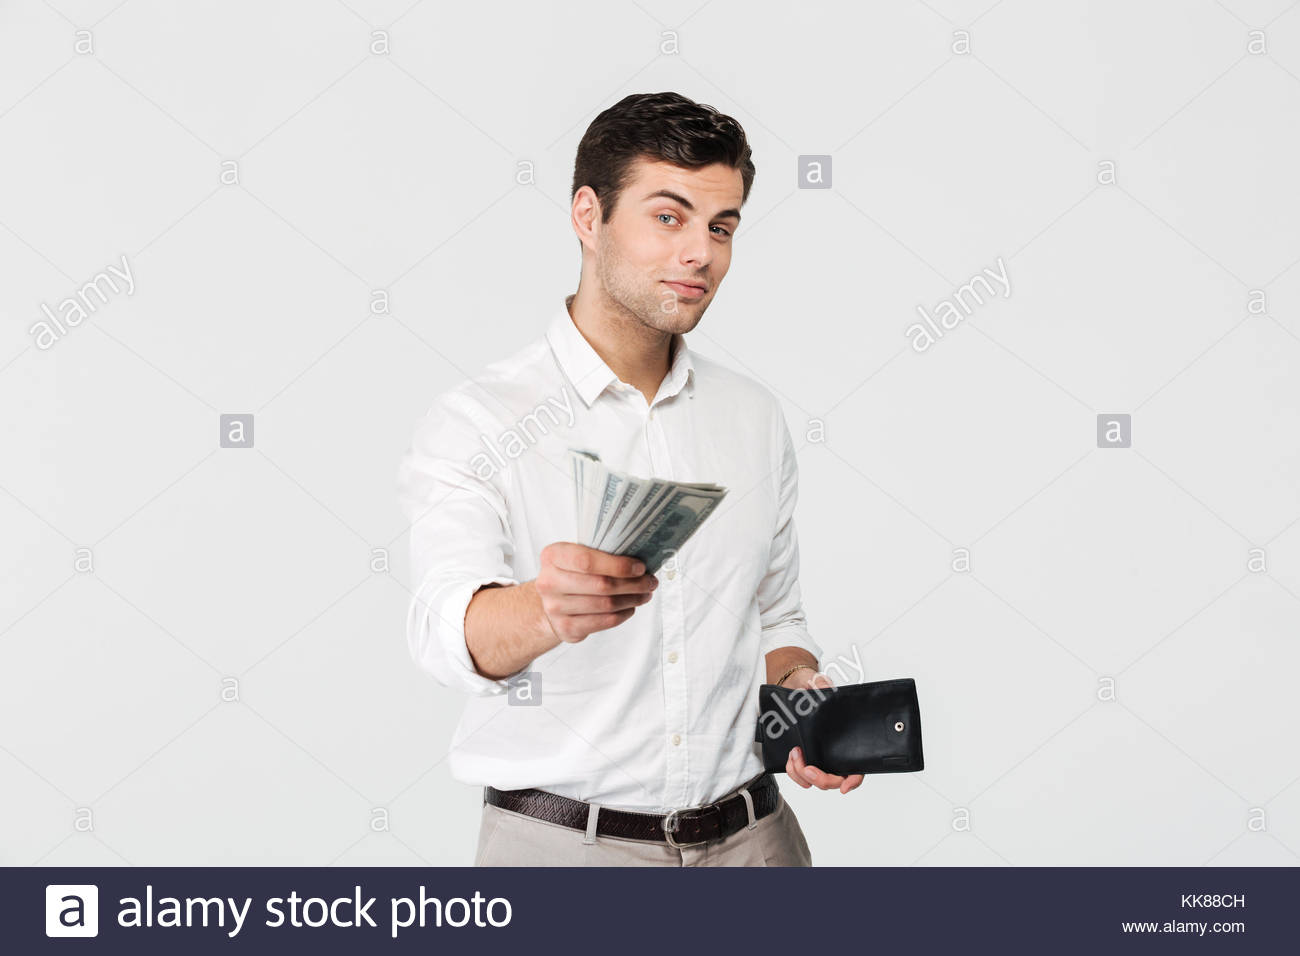 portrait-of-a-successful-smiling-man-holding-wallet-and-giving-money-KK88CH.jpg